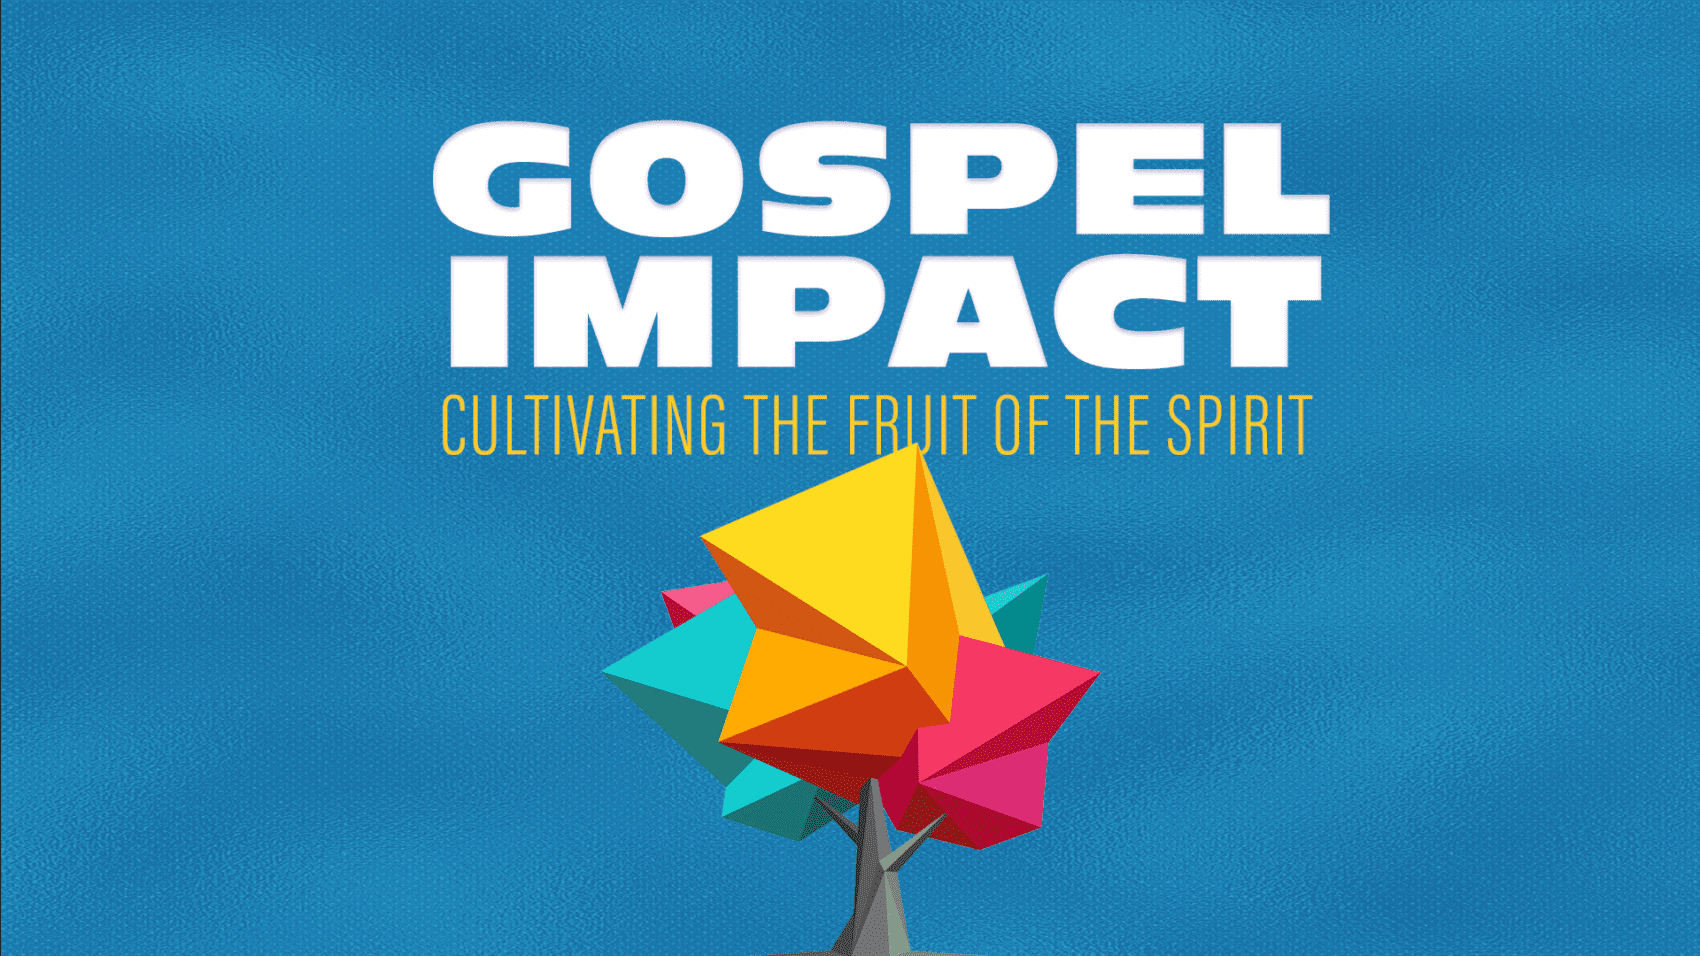 Featured image for “Gospel Impact: Cultivating The Fruit of the Spirit”